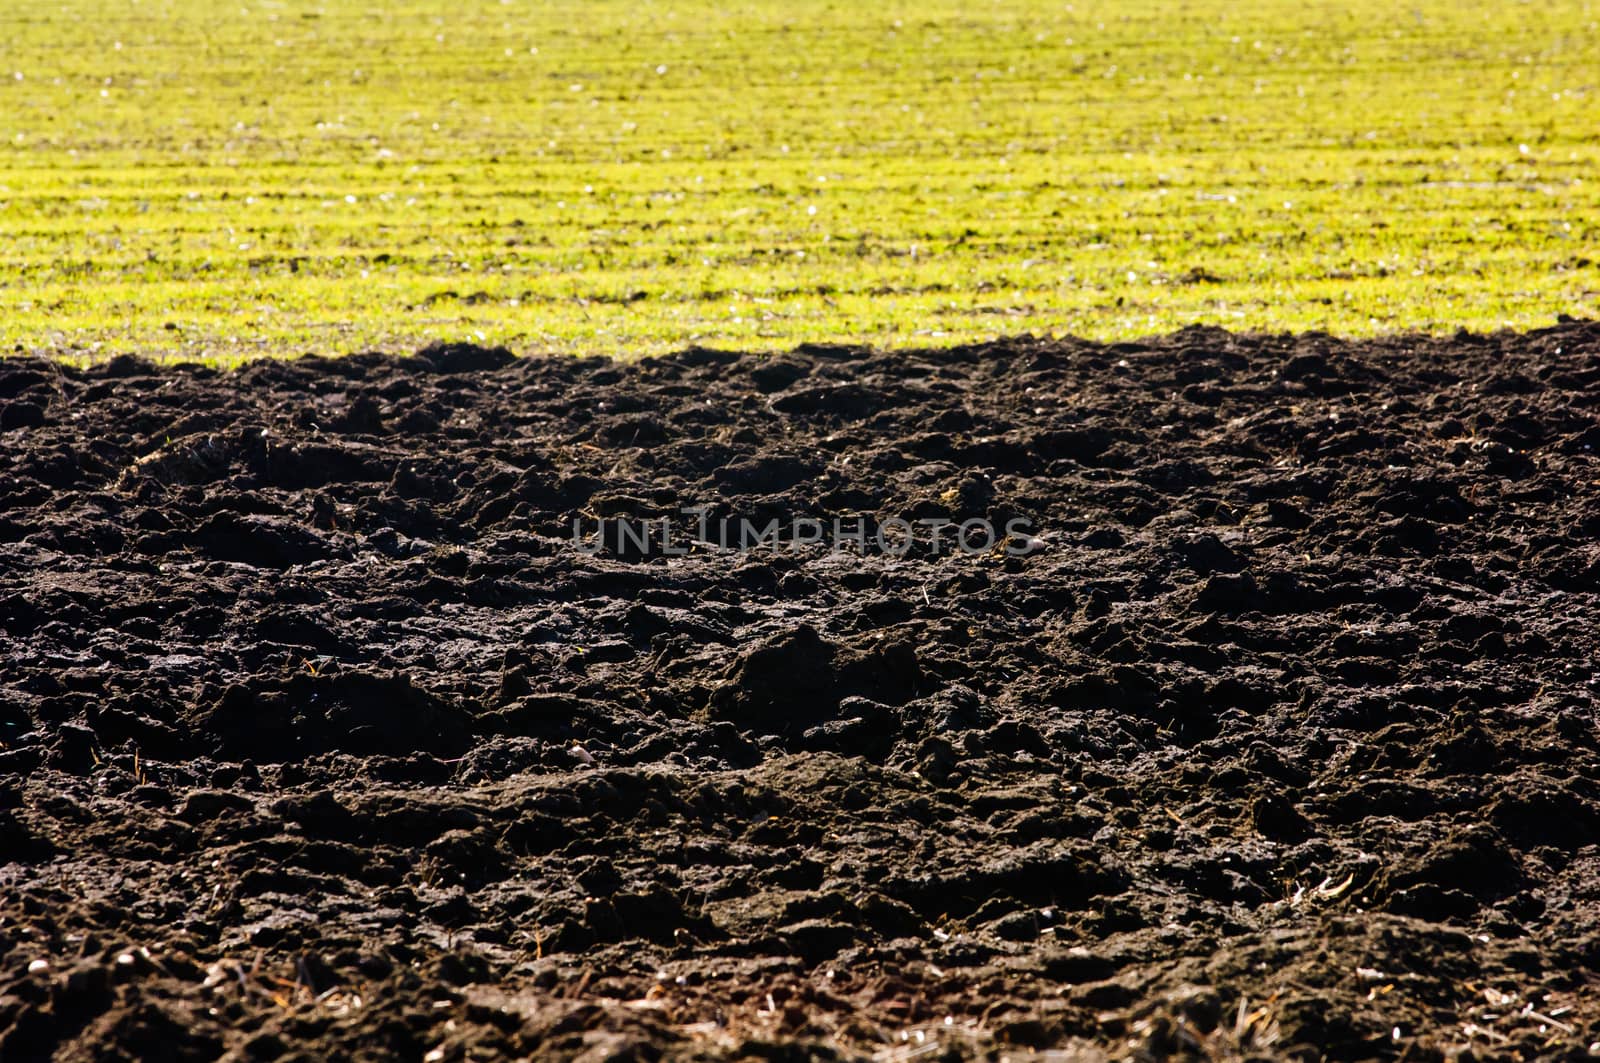 Ploughed soil in agricultural field arable land by horizonphoto